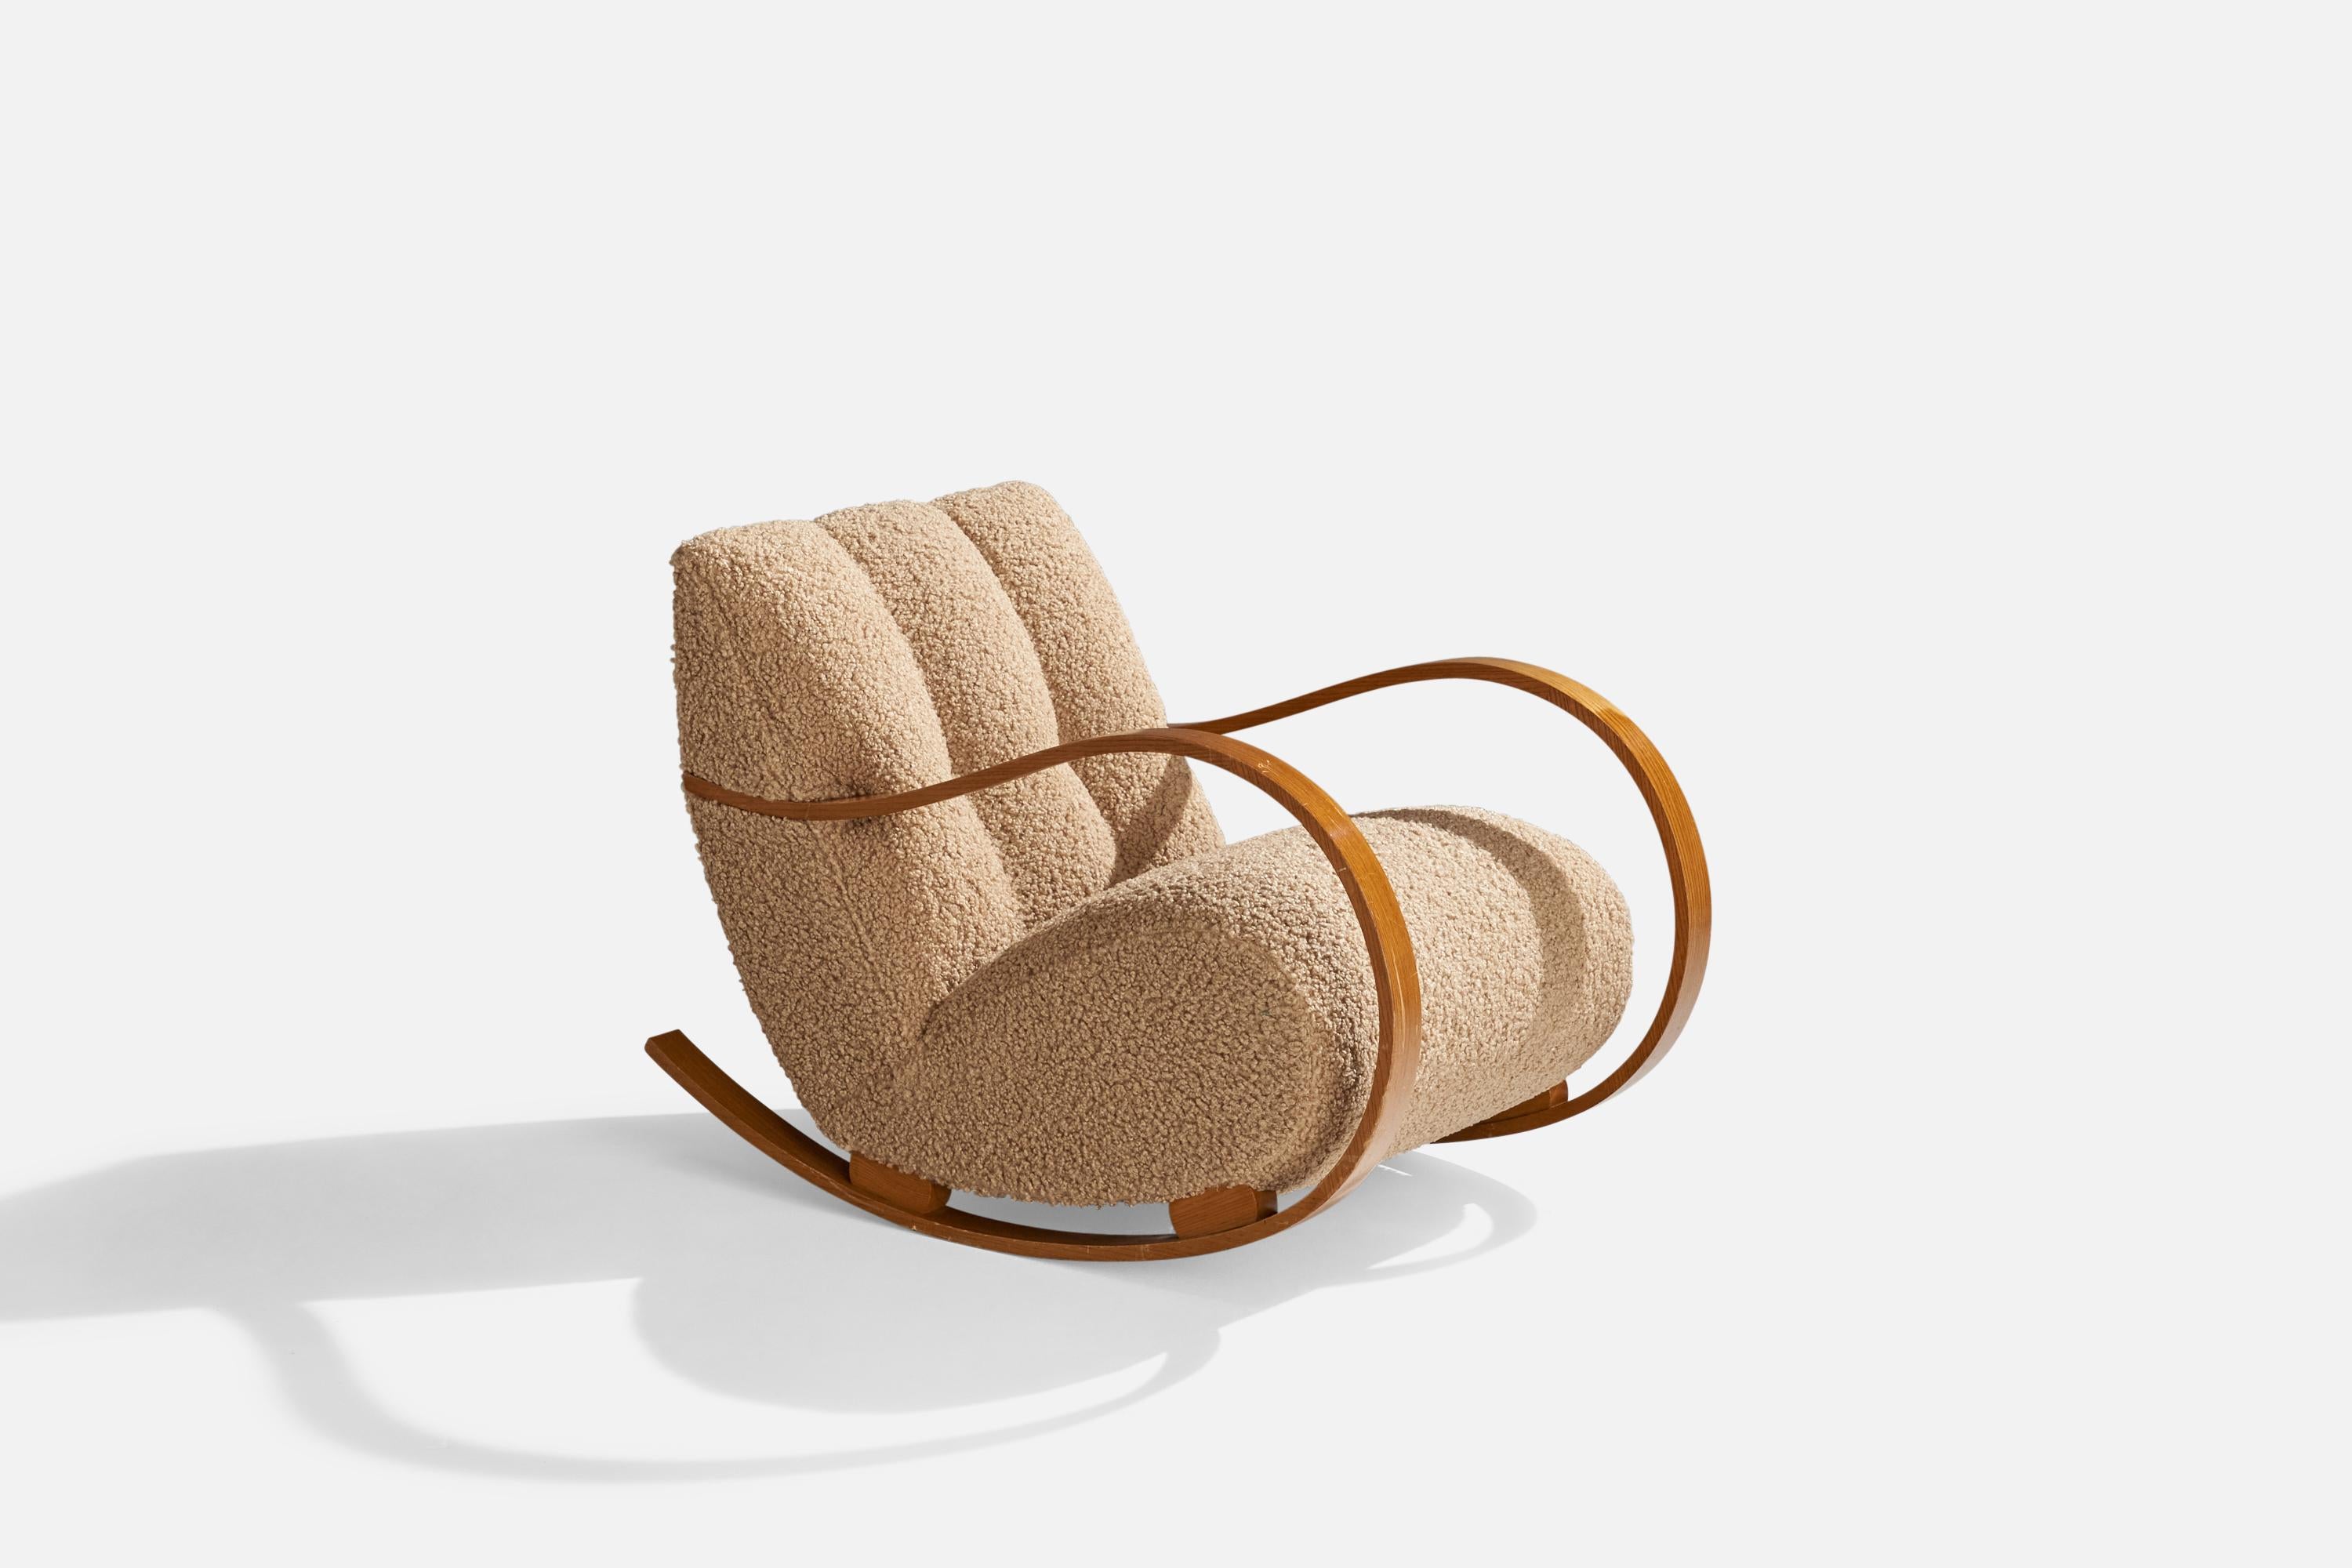 A moulded wood and brown bouclé fabric rocking lounge chair designed and produced in Sweden, 1940s.

Seat height 18”.
Reupholstered in brand new bouclé fabric.